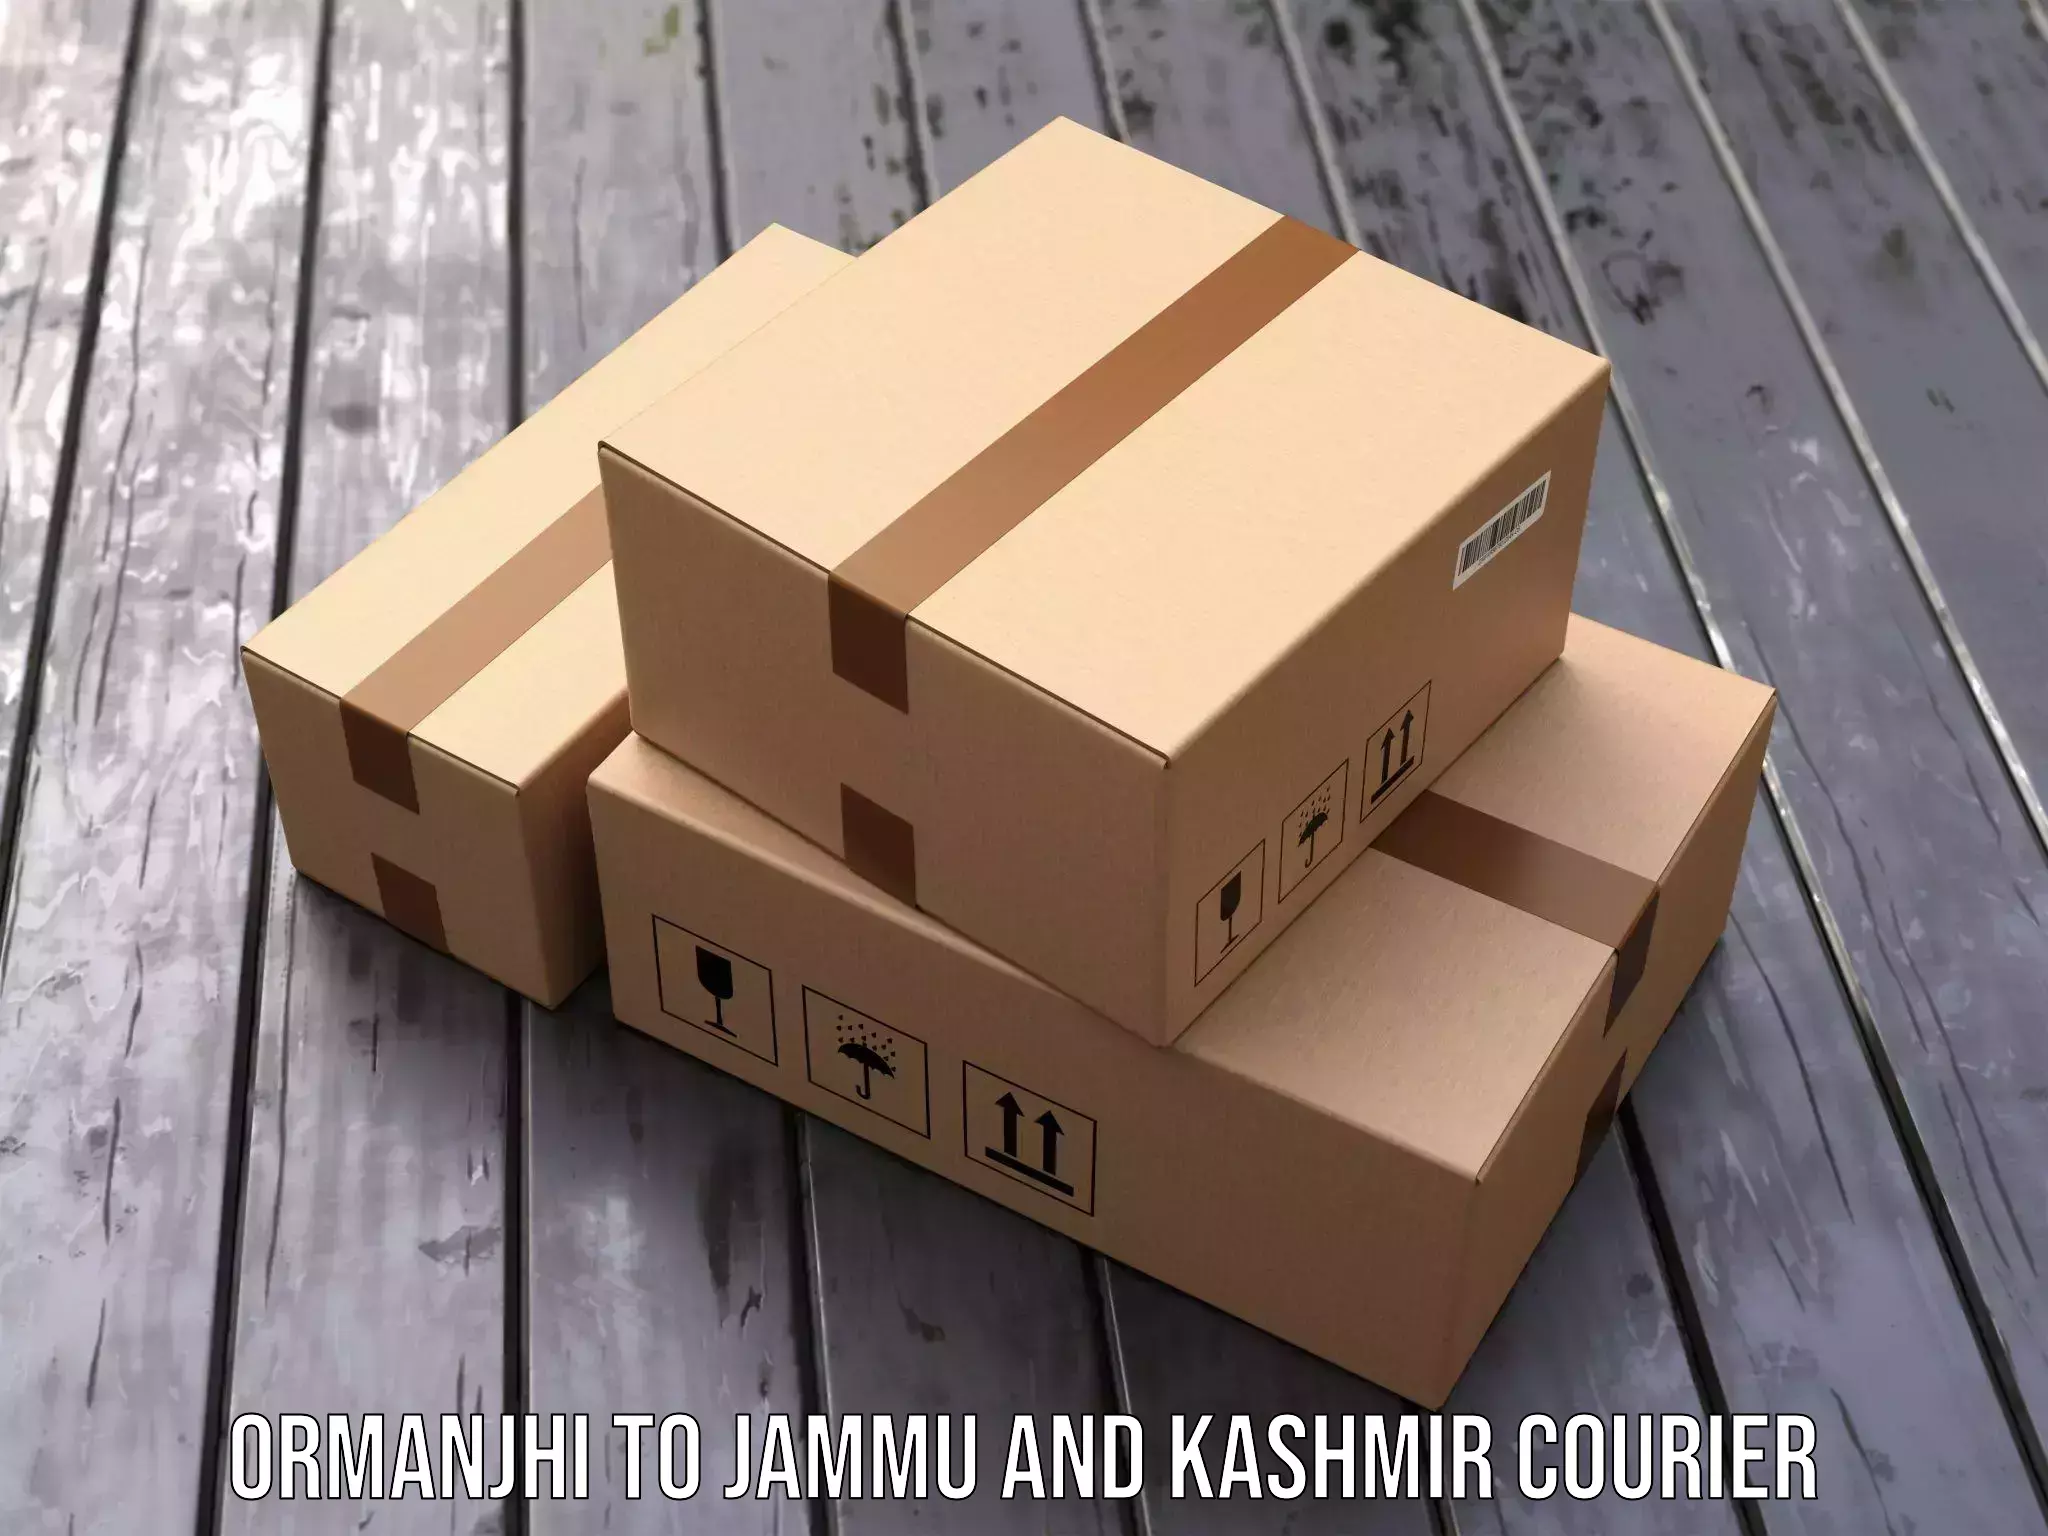 Efficient freight service in Ormanjhi to Jammu and Kashmir